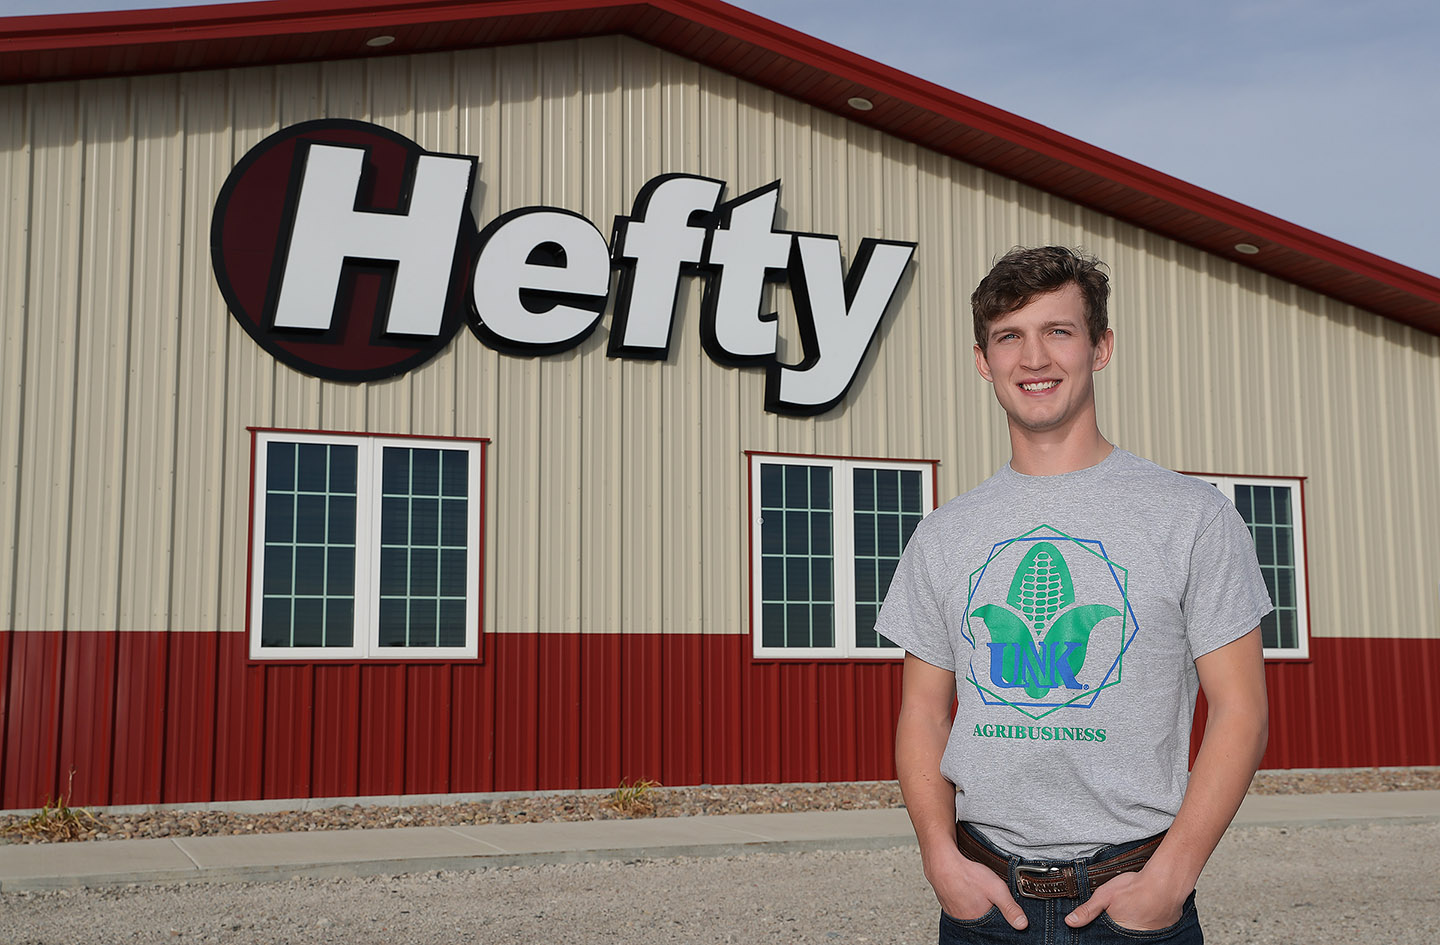 Michael Gibbens doesn’t have to worry about finding a job after graduation. The UNK senior already accepted an advanced sales internship/training position with Hefty Seed Company in Wood River. (Photos by Erika Pritchard, UNK Communications)